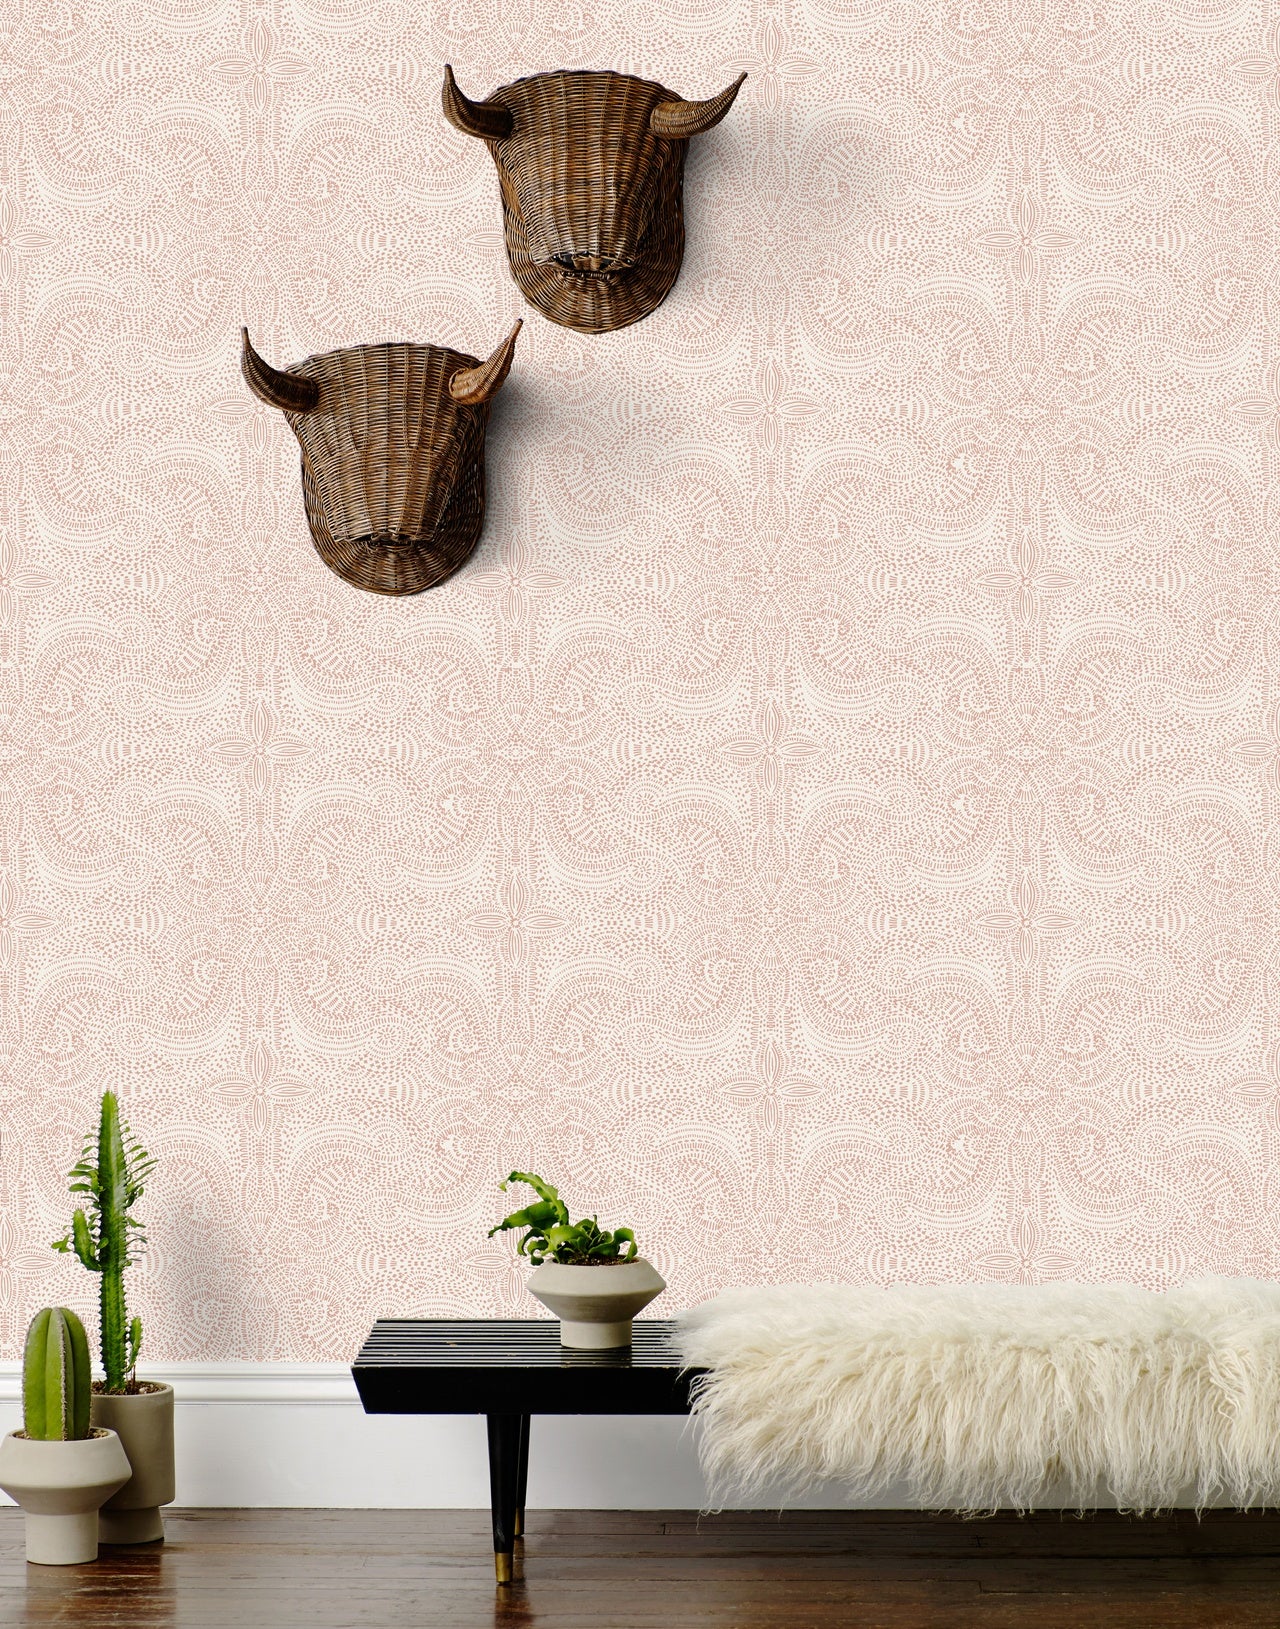 Andanza wallpaper in Blush by Laundry Studio for Hygge & West